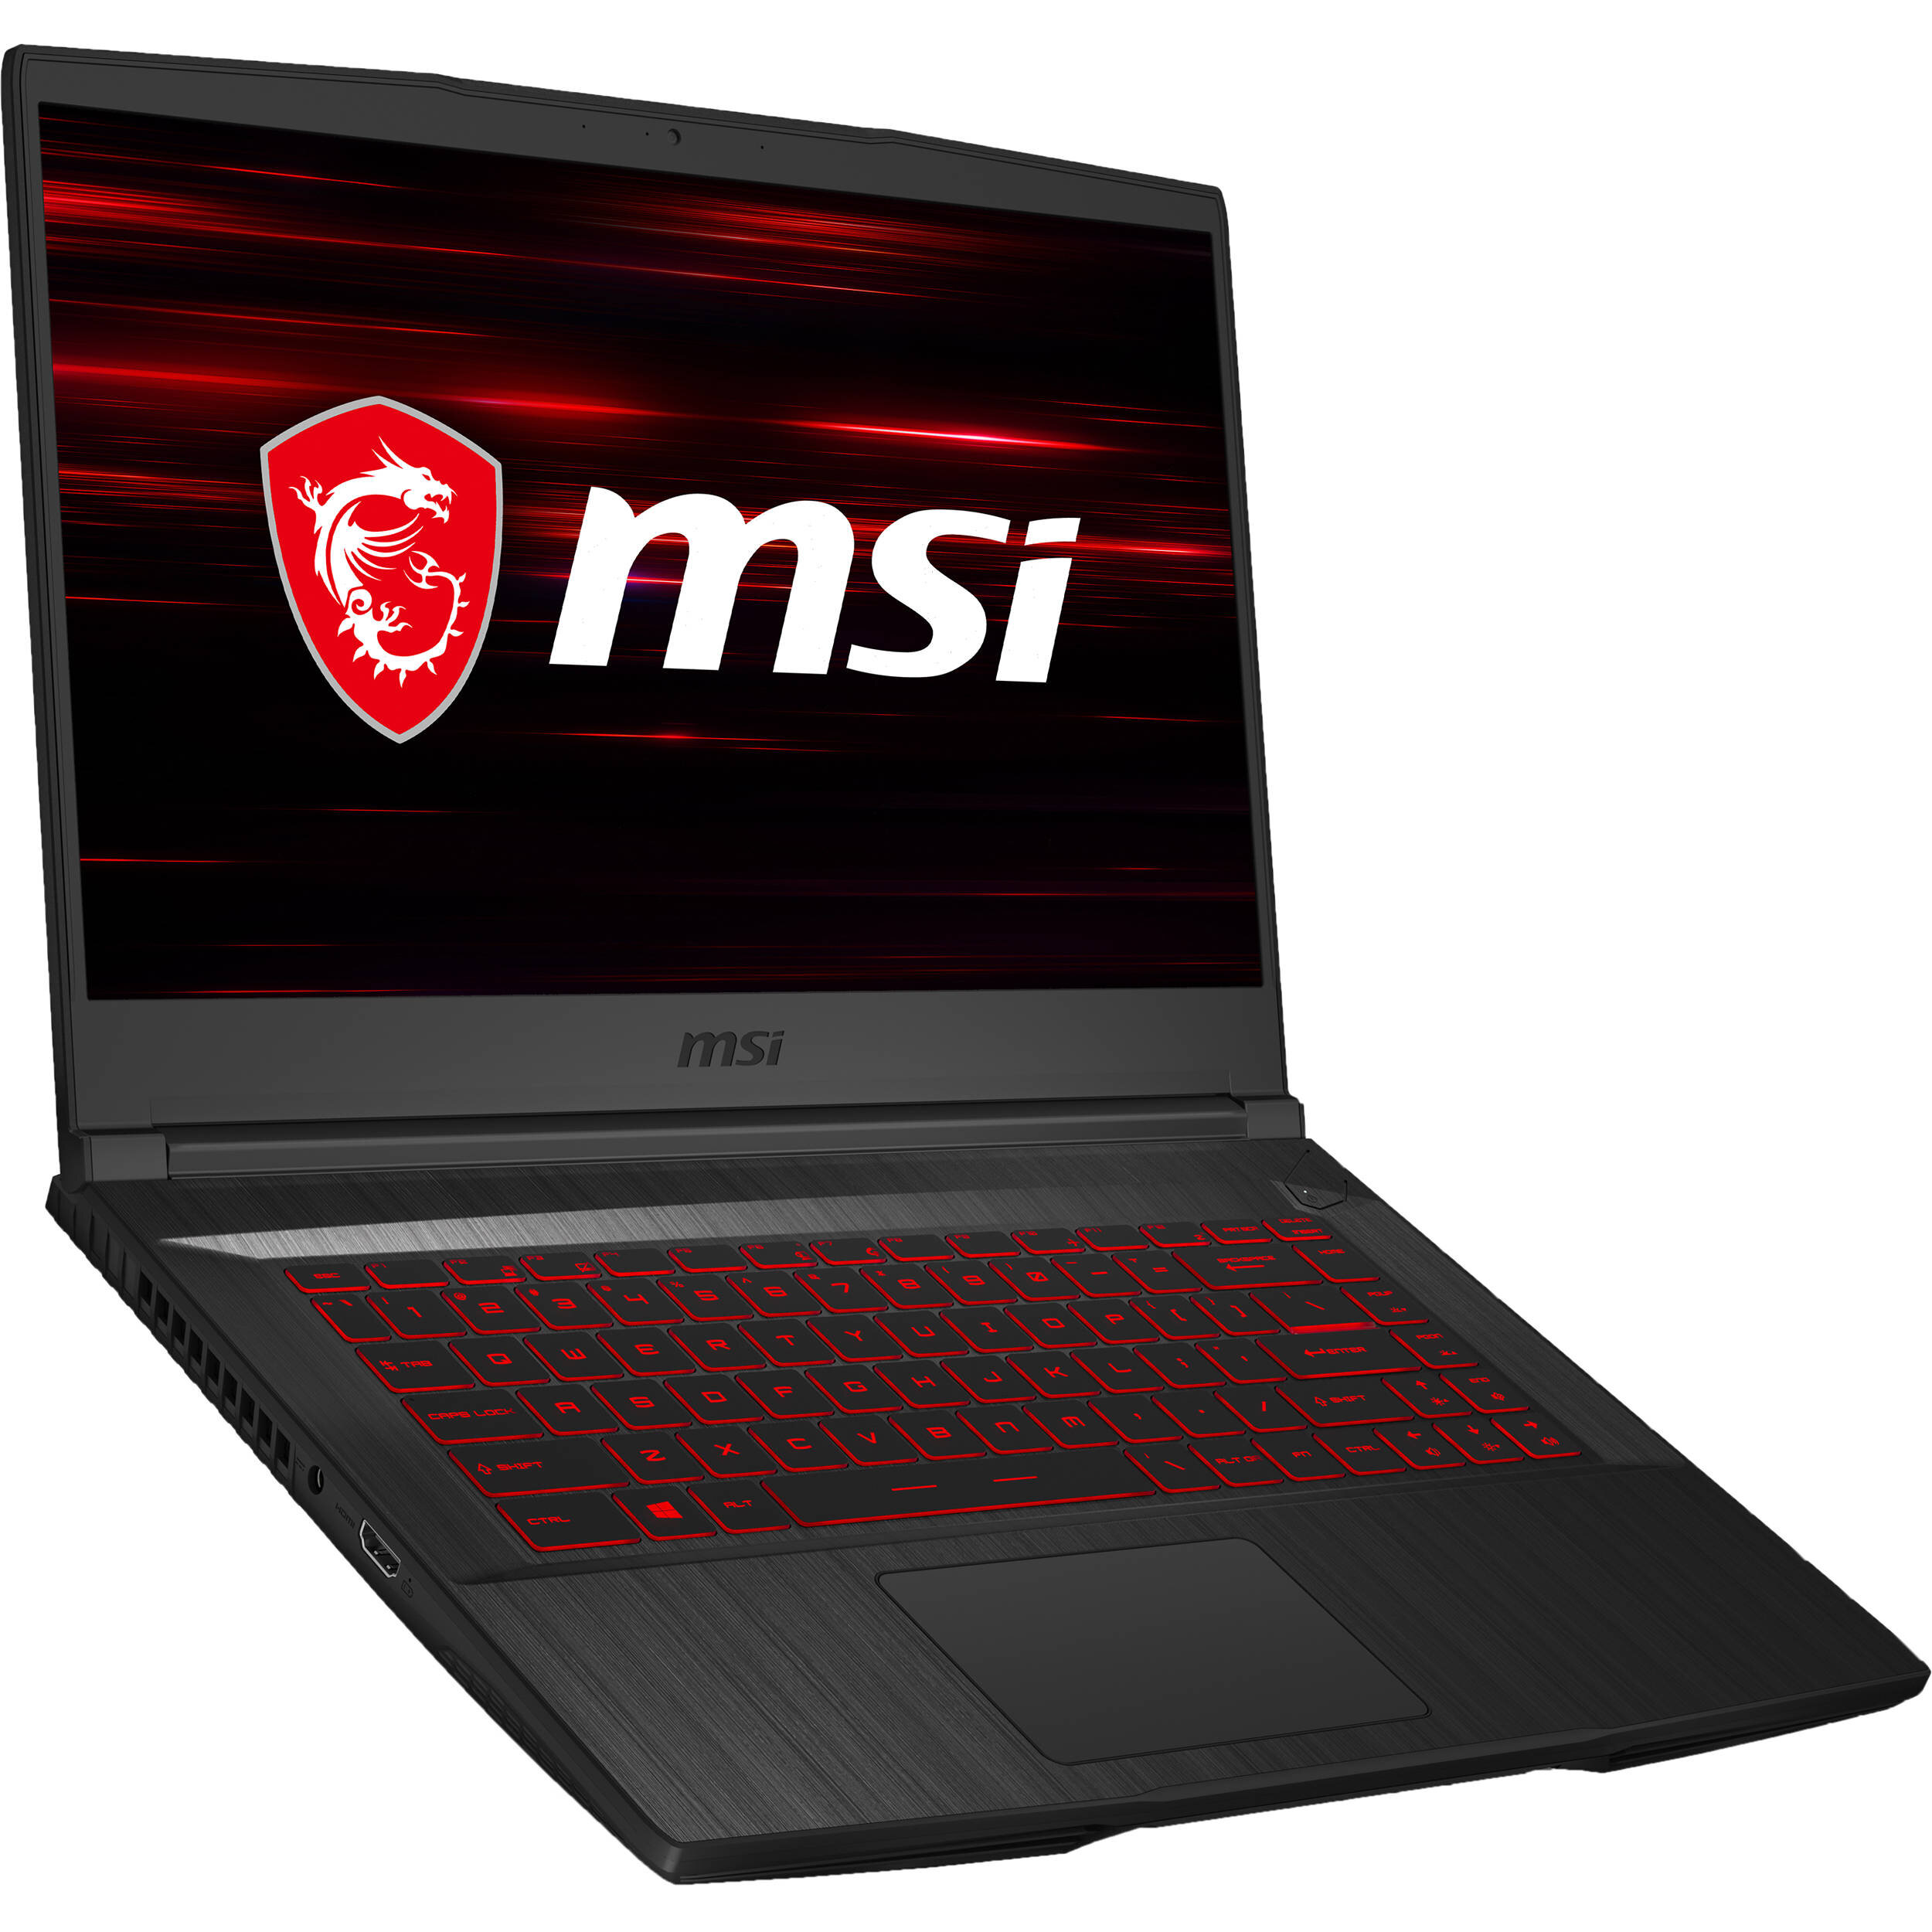 MSI GF65 Thin Review - A Gaming Laptop Now With Intel 10'th Gen CPU